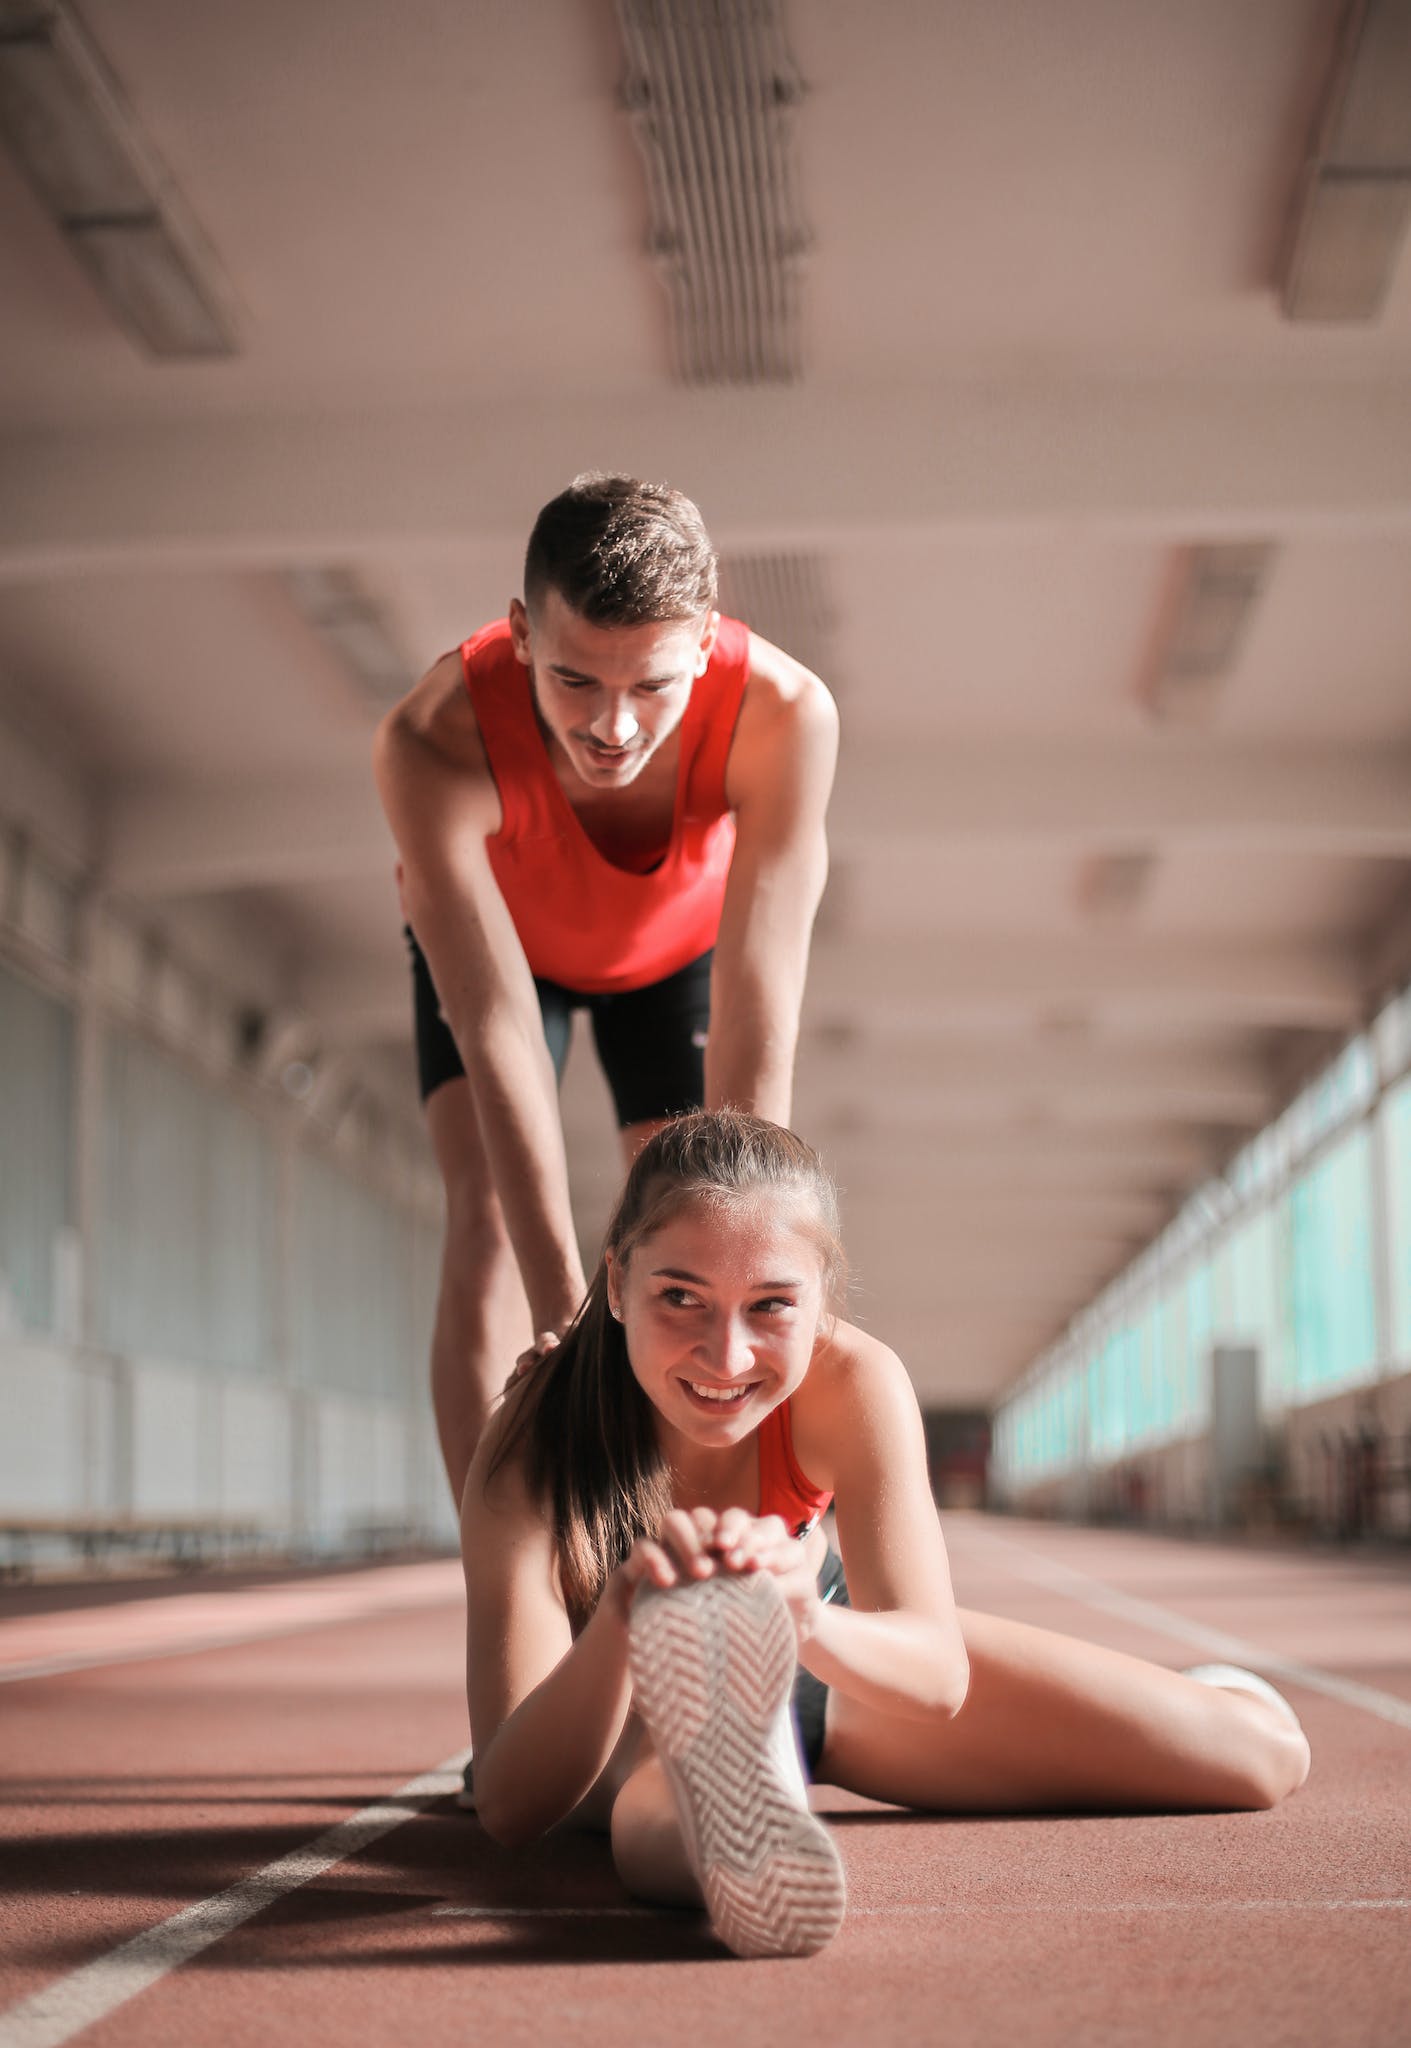 Cheerful sportswoman sitting on floor and stretching legs while man pushing back forward helping with warm up